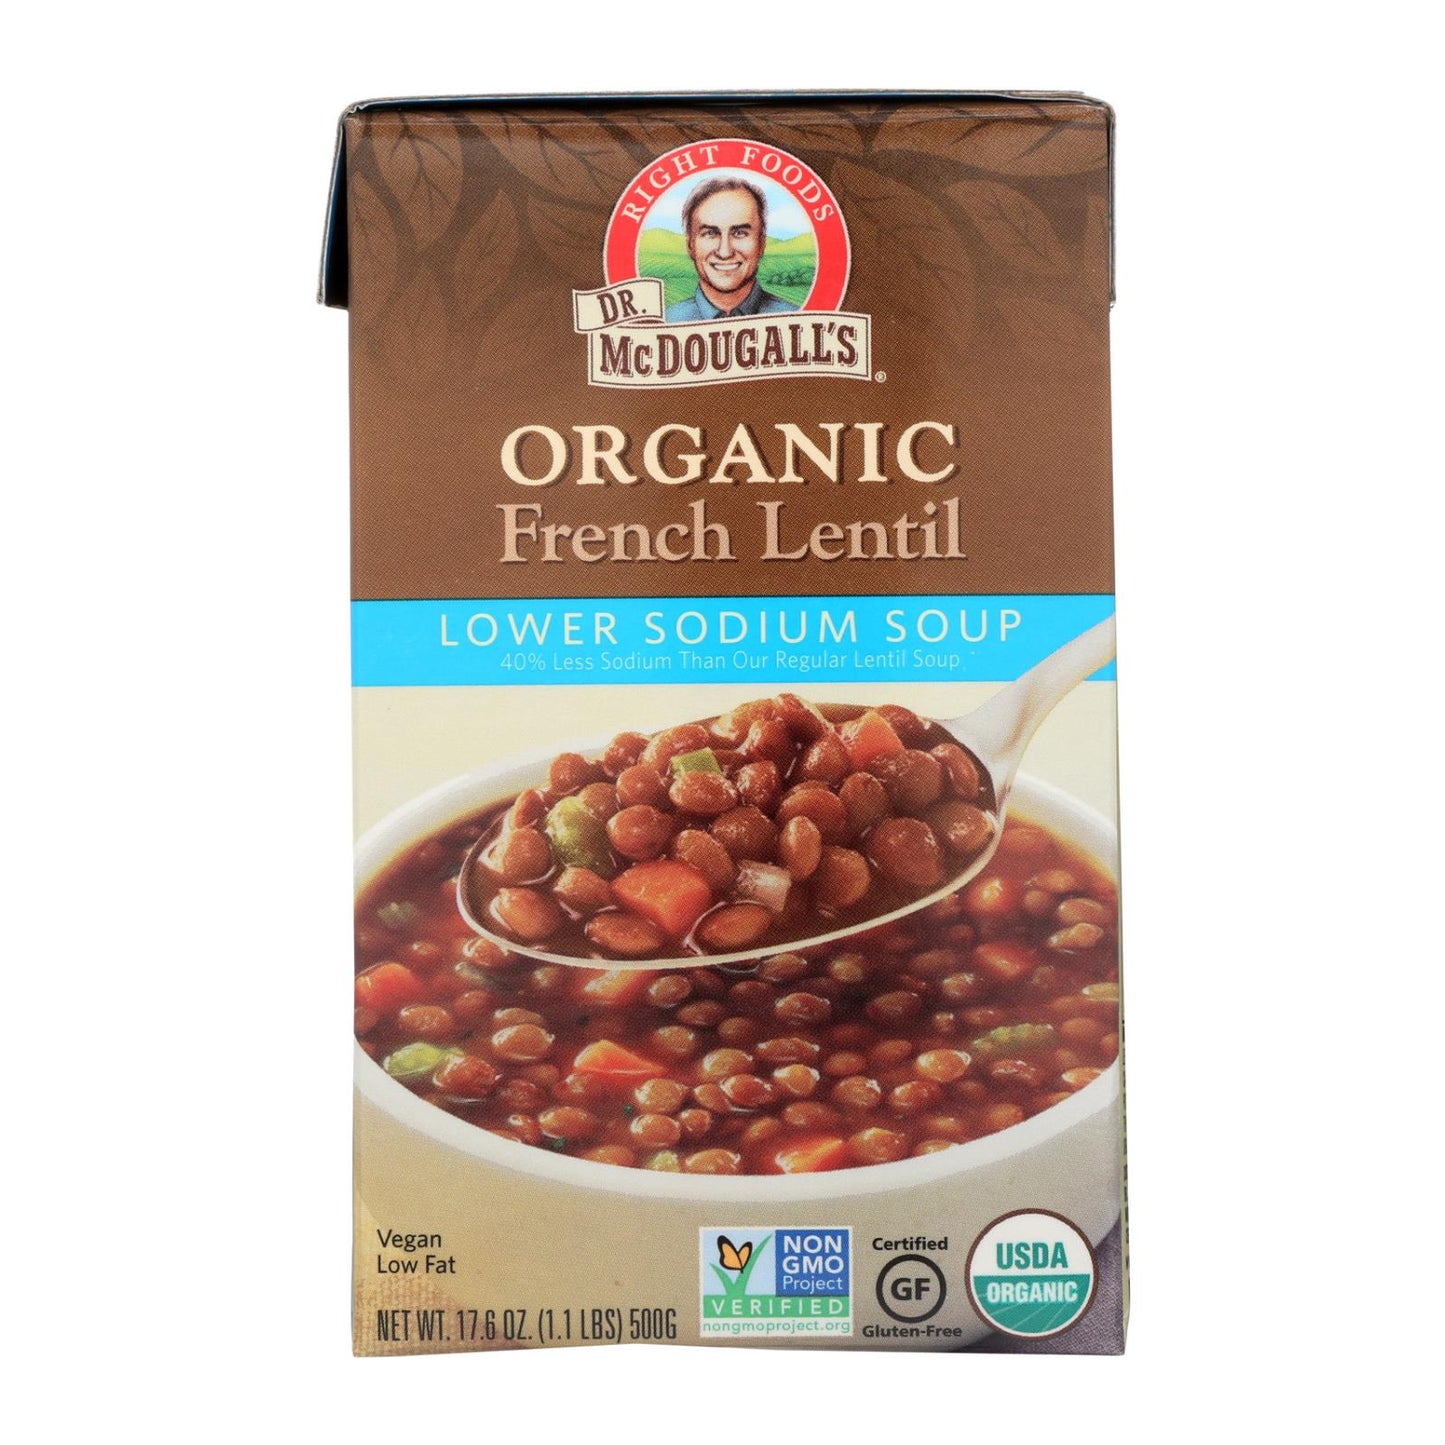 Dr. Mcdougall's Organic French Lentil Lower Sodium Soup - Case Of 6 - 17.6 Oz.